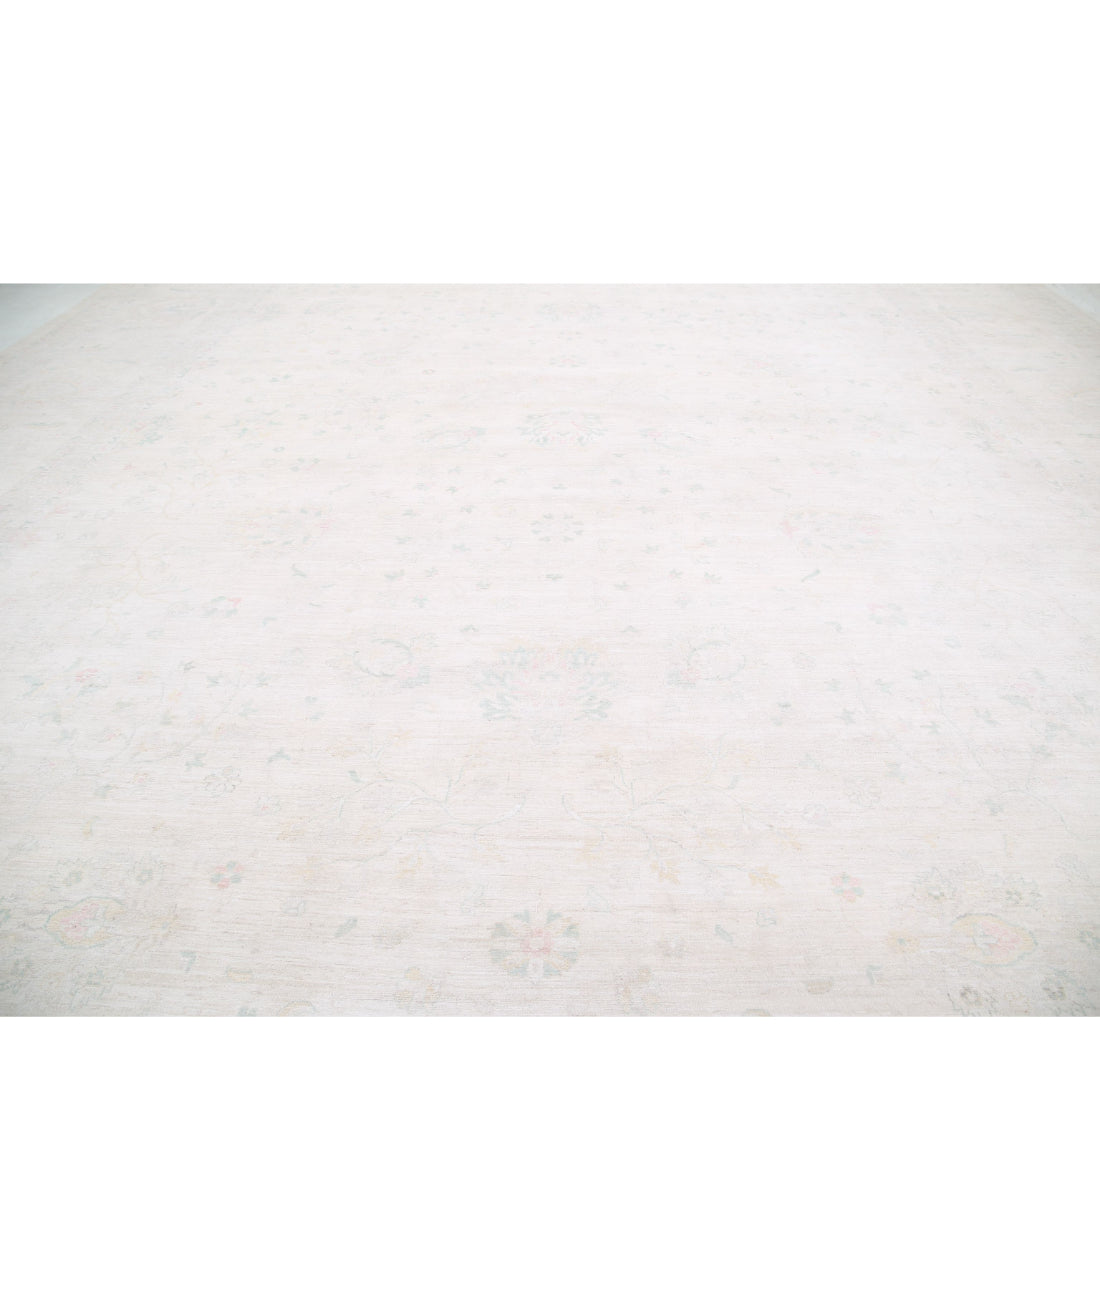 Serenity 19'4'' X 25'6'' Hand-Knotted Wool Rug 19'4'' x 25'6'' (580 X 765) / Ivory / Ivory